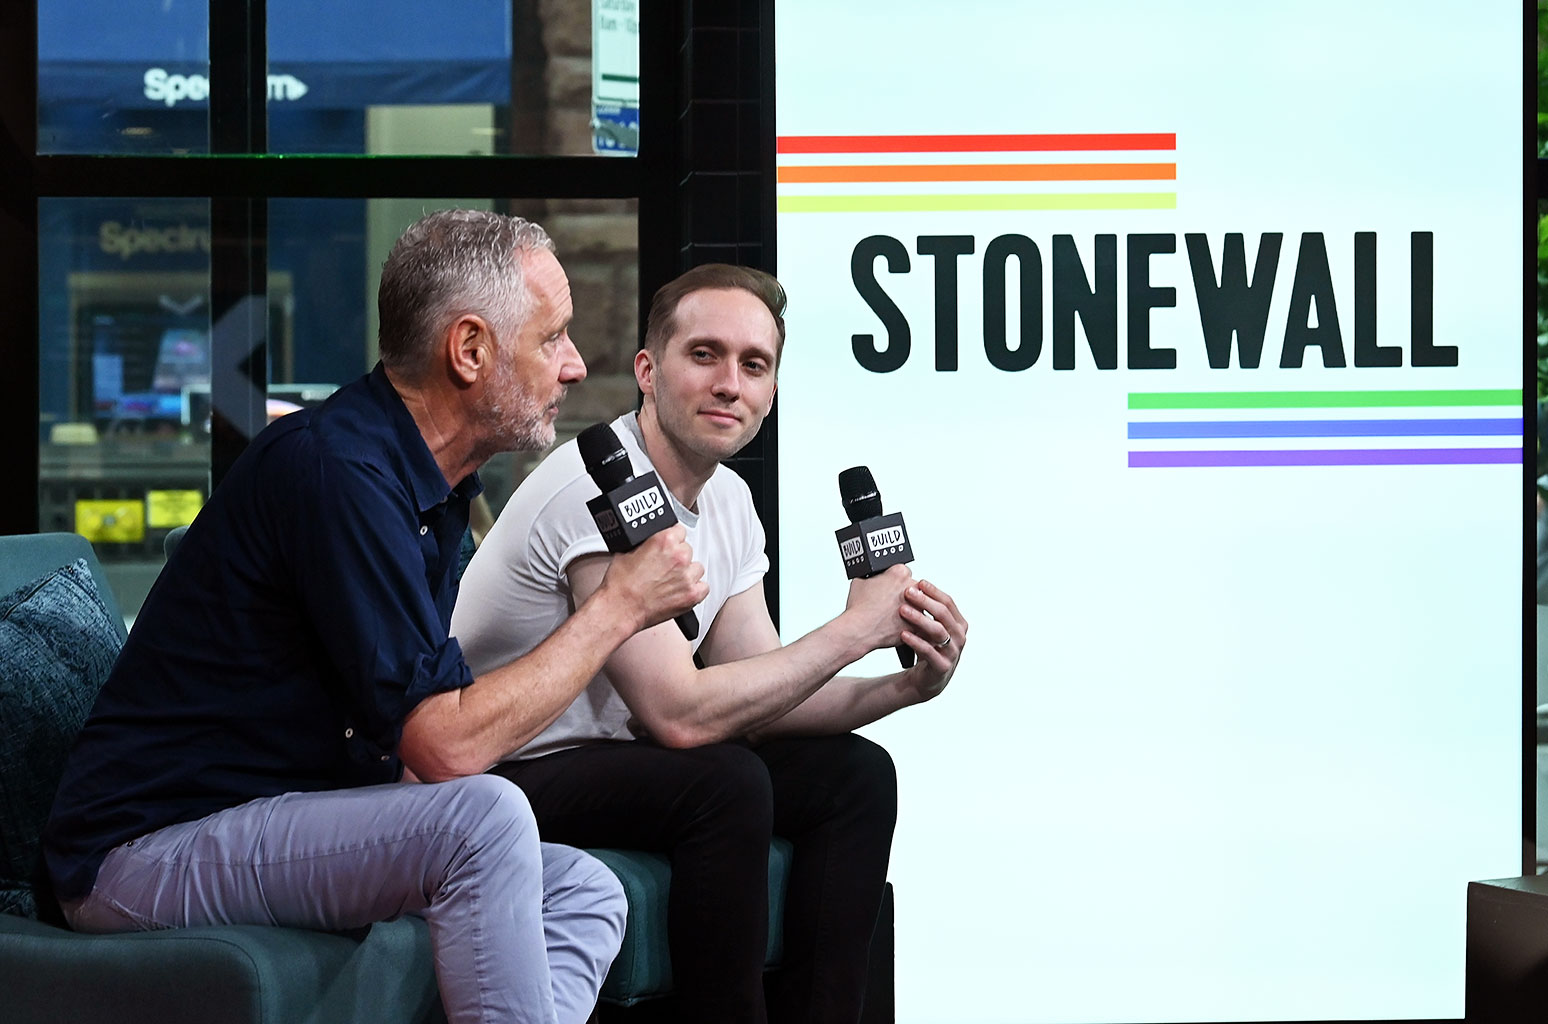 Mark Campbell sits for an interview with the artwork for Stonewall in the background.